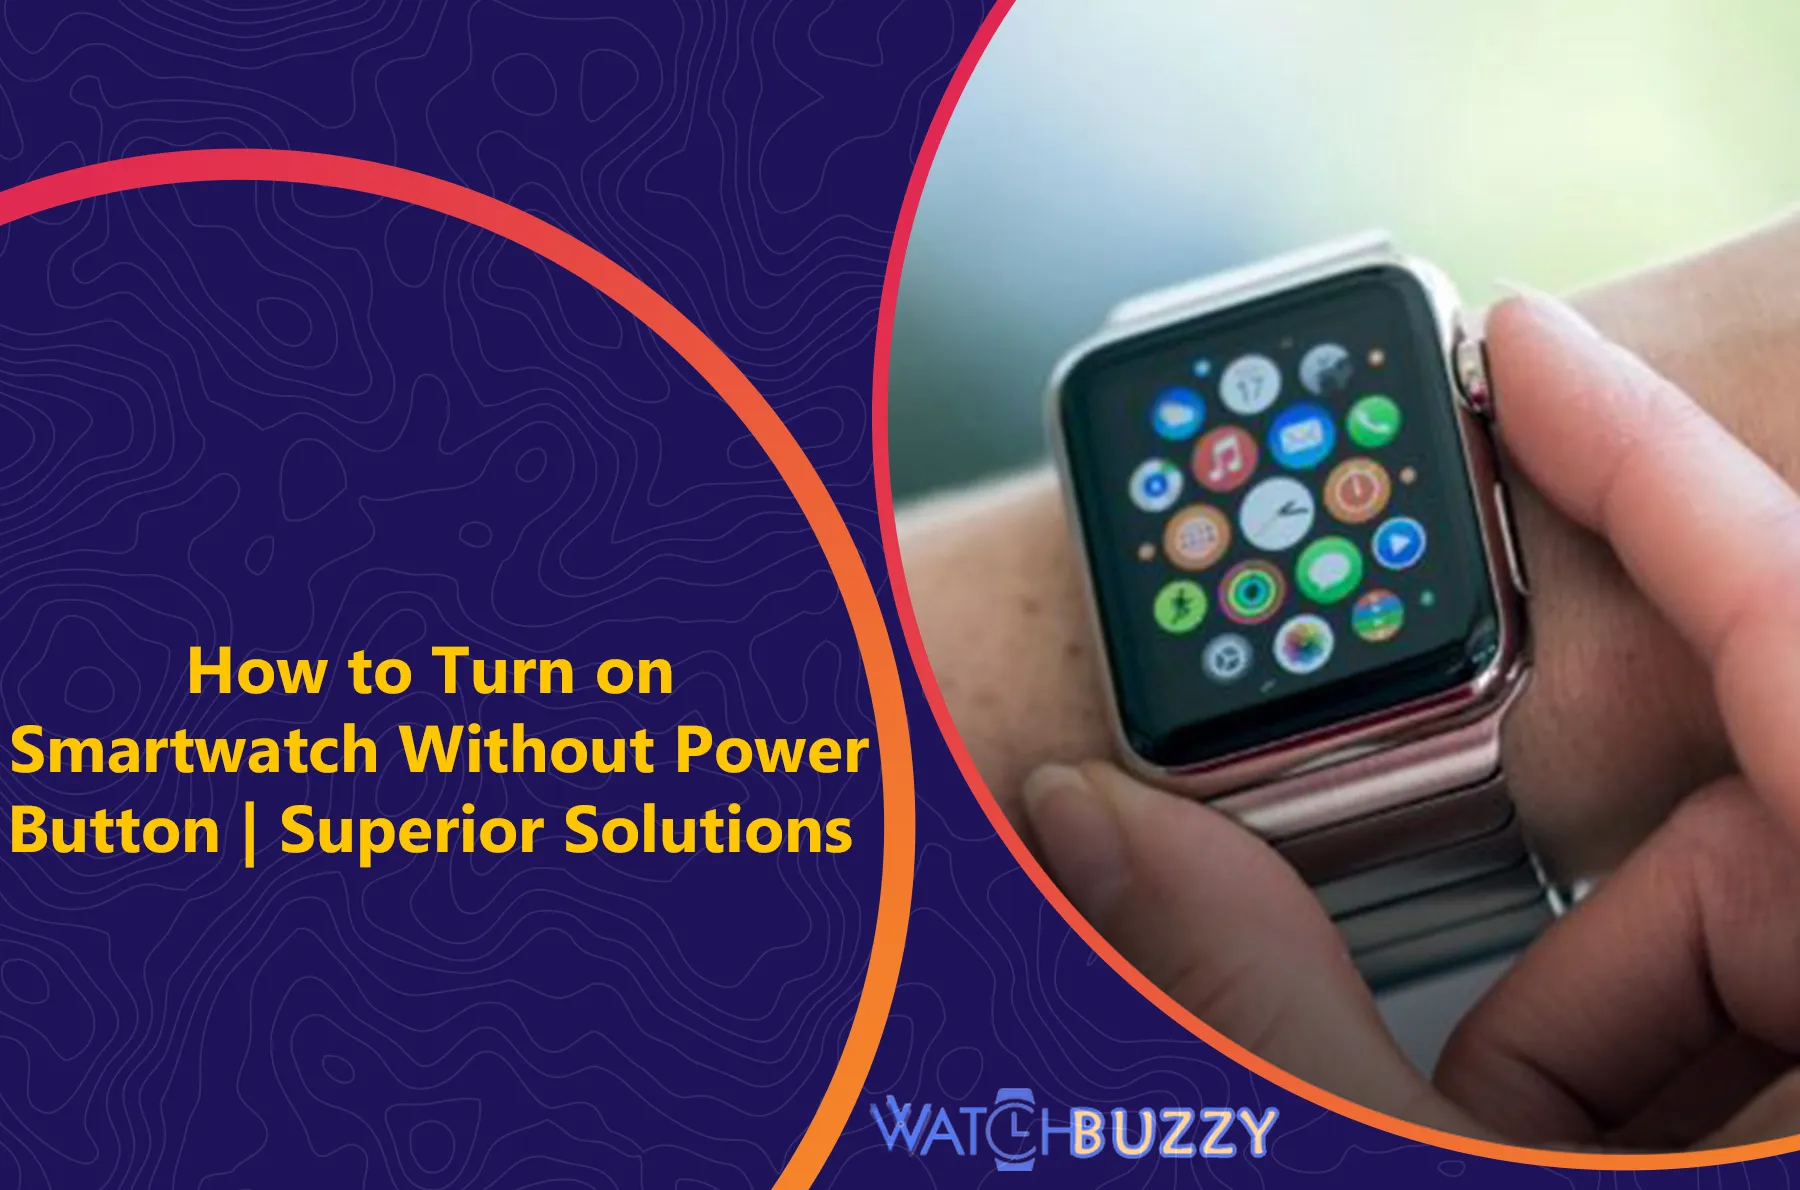 How to Turn on Smartwatch Without Power Button | Superior Solutions